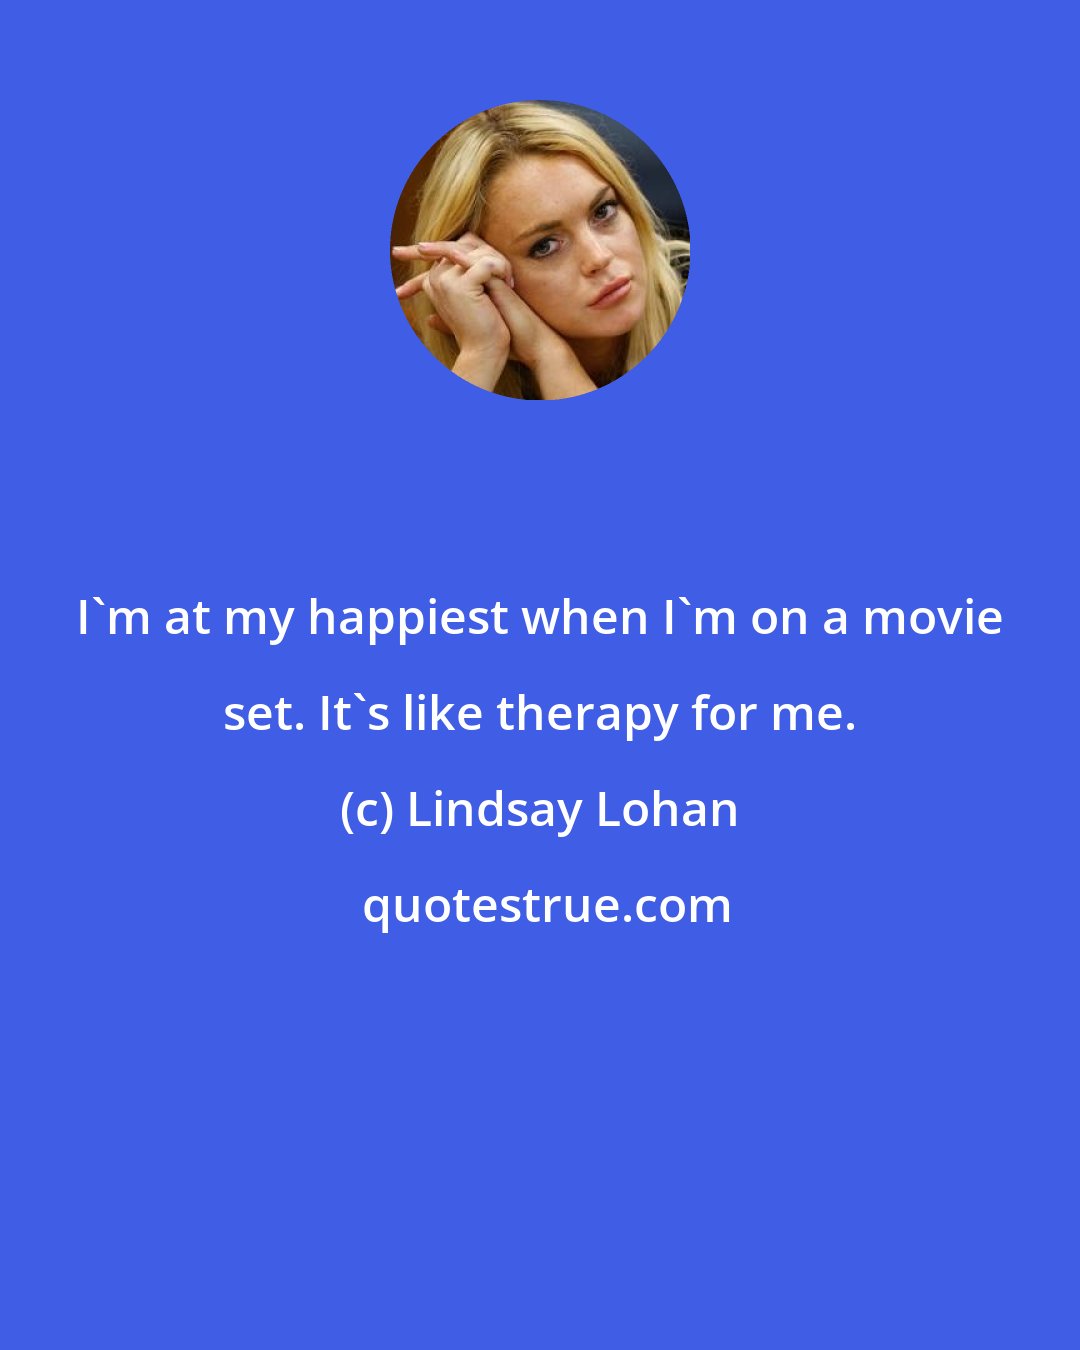 Lindsay Lohan: I'm at my happiest when I'm on a movie set. It's like therapy for me.